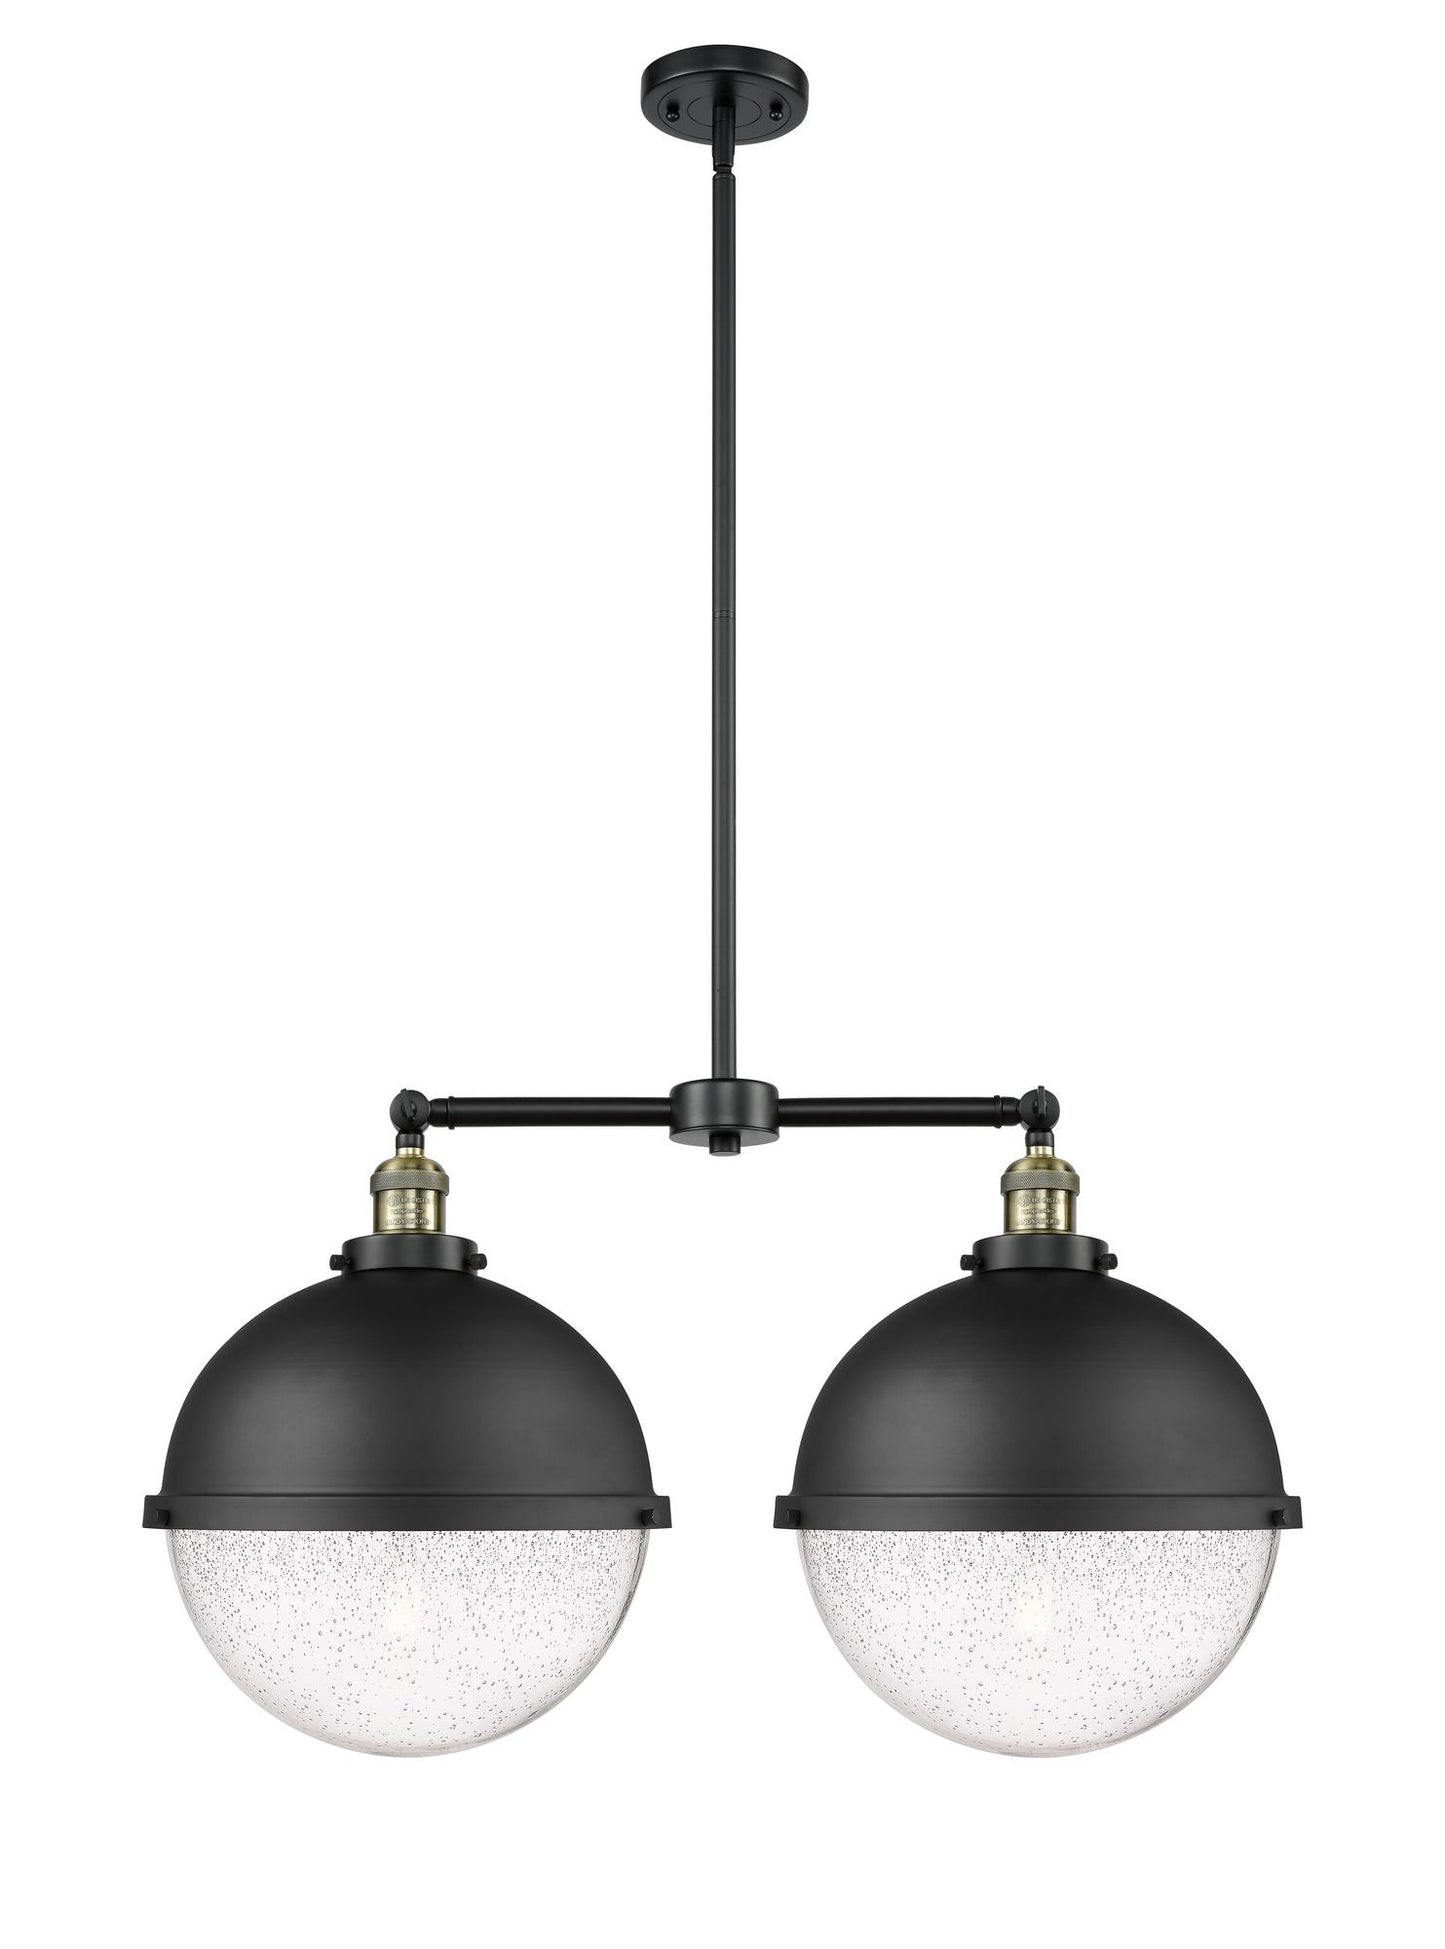 209-BAB-HFS-124-BK 2-Light 18" Matte Black Island Light - Seedy Hampden Glass - LED Bulb - Dimmensions: 18 x 12.875 x 16.75<br>Minimum Height : 25.75<br>Maximum Height : 49.75 - Sloped Ceiling Compatible: Yes